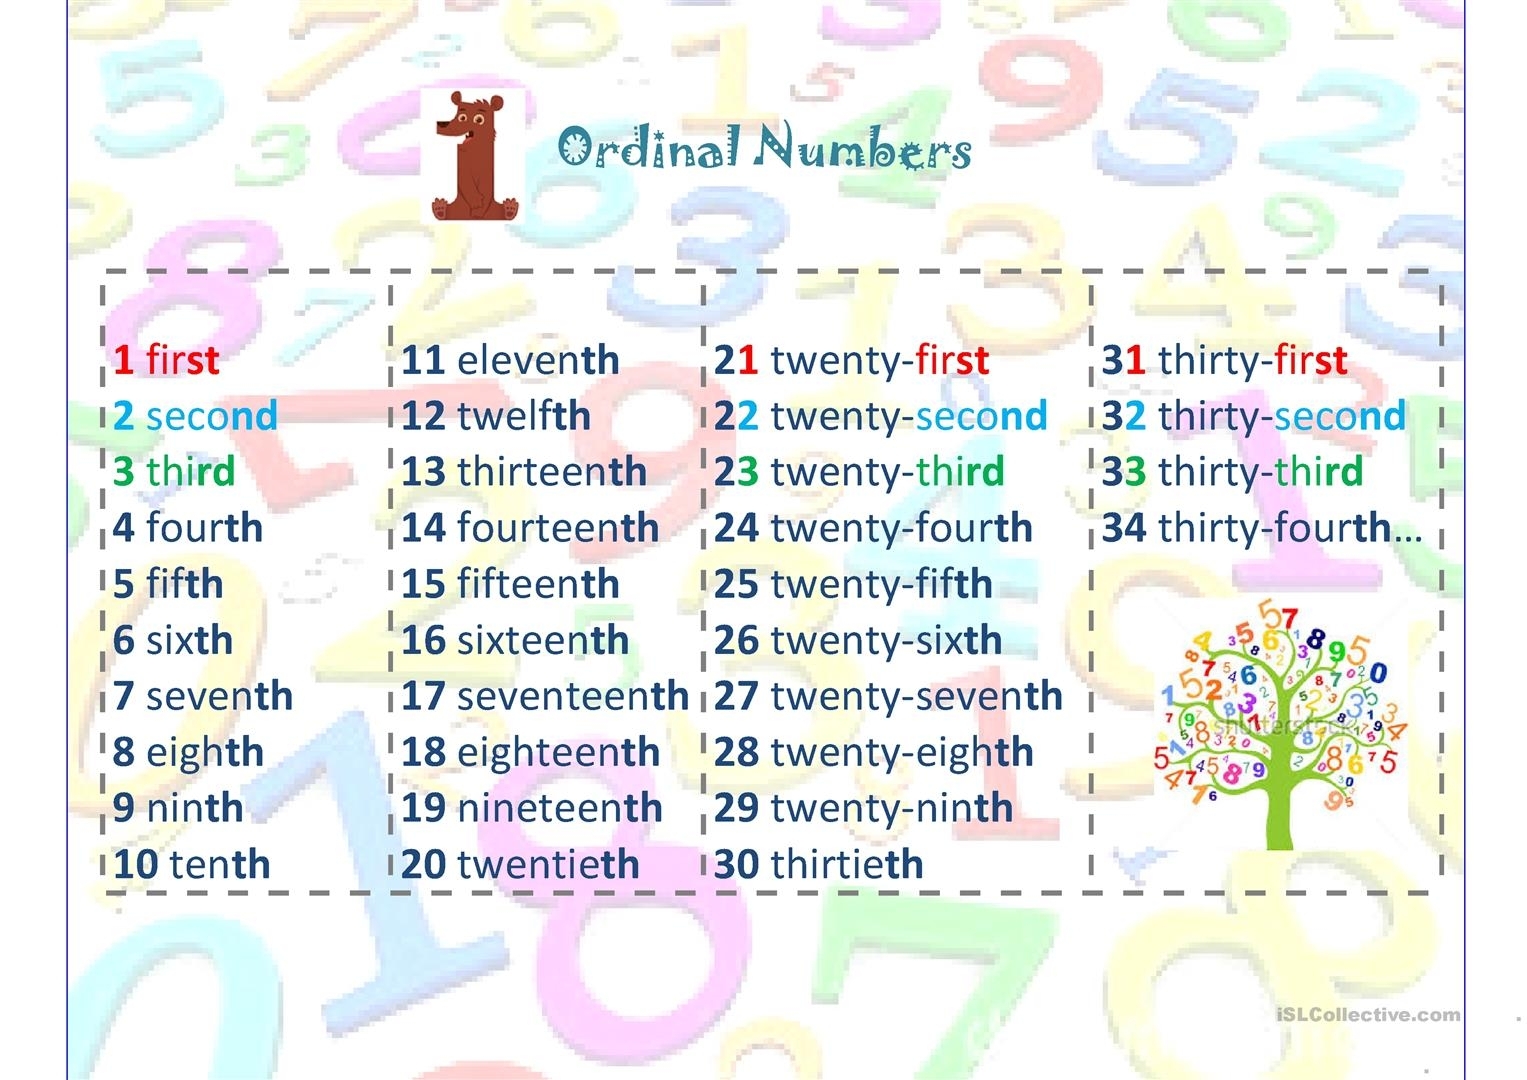 Cardinal And Ordinal Numbers - English Esl Worksheets For